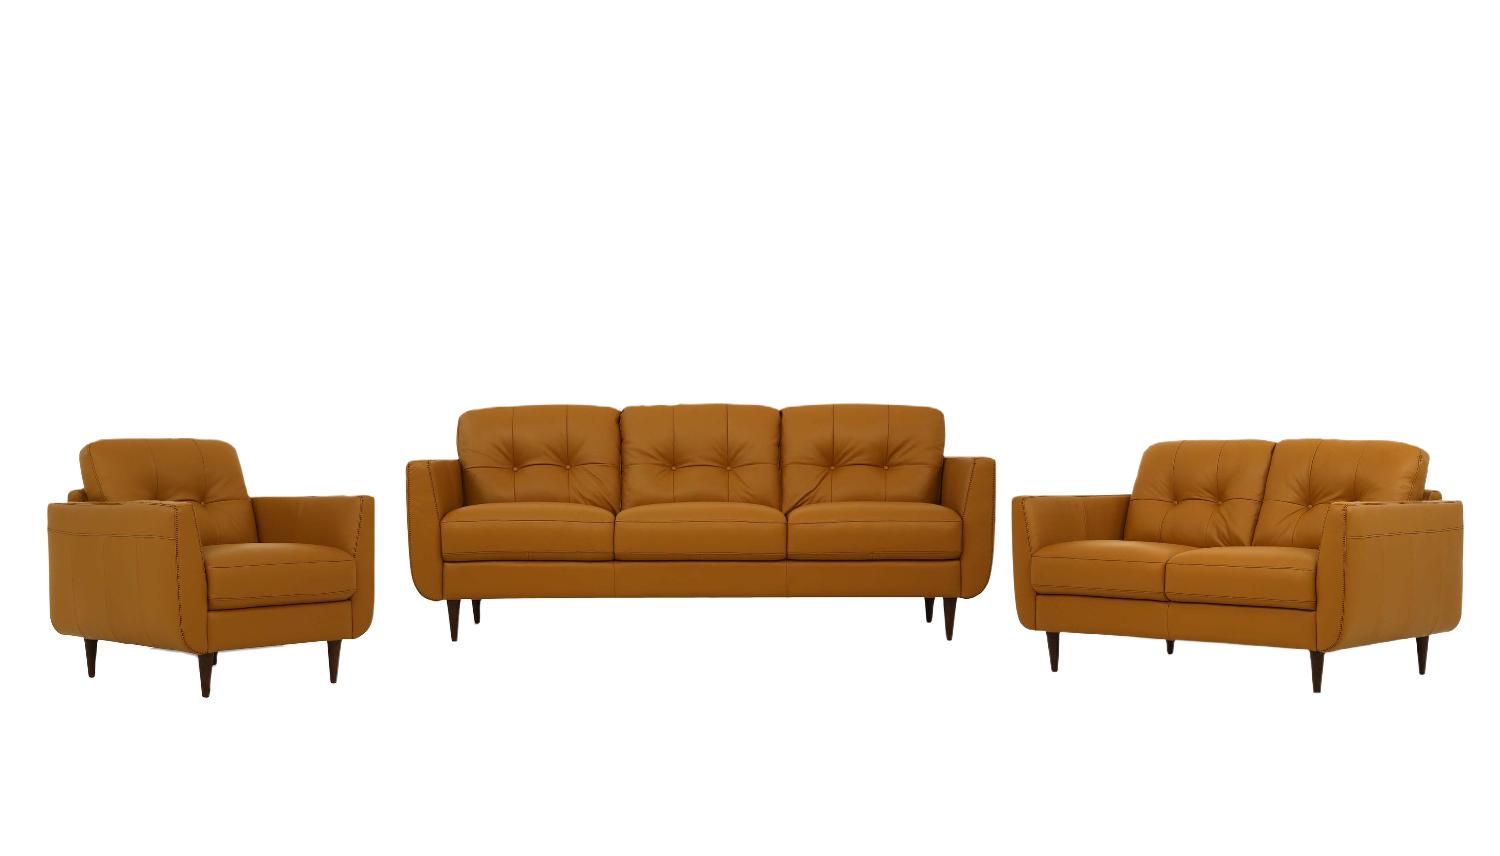 Transitional Sofa Loveseat and Chair Set Radwan 54955-3pcs in Camel Leather